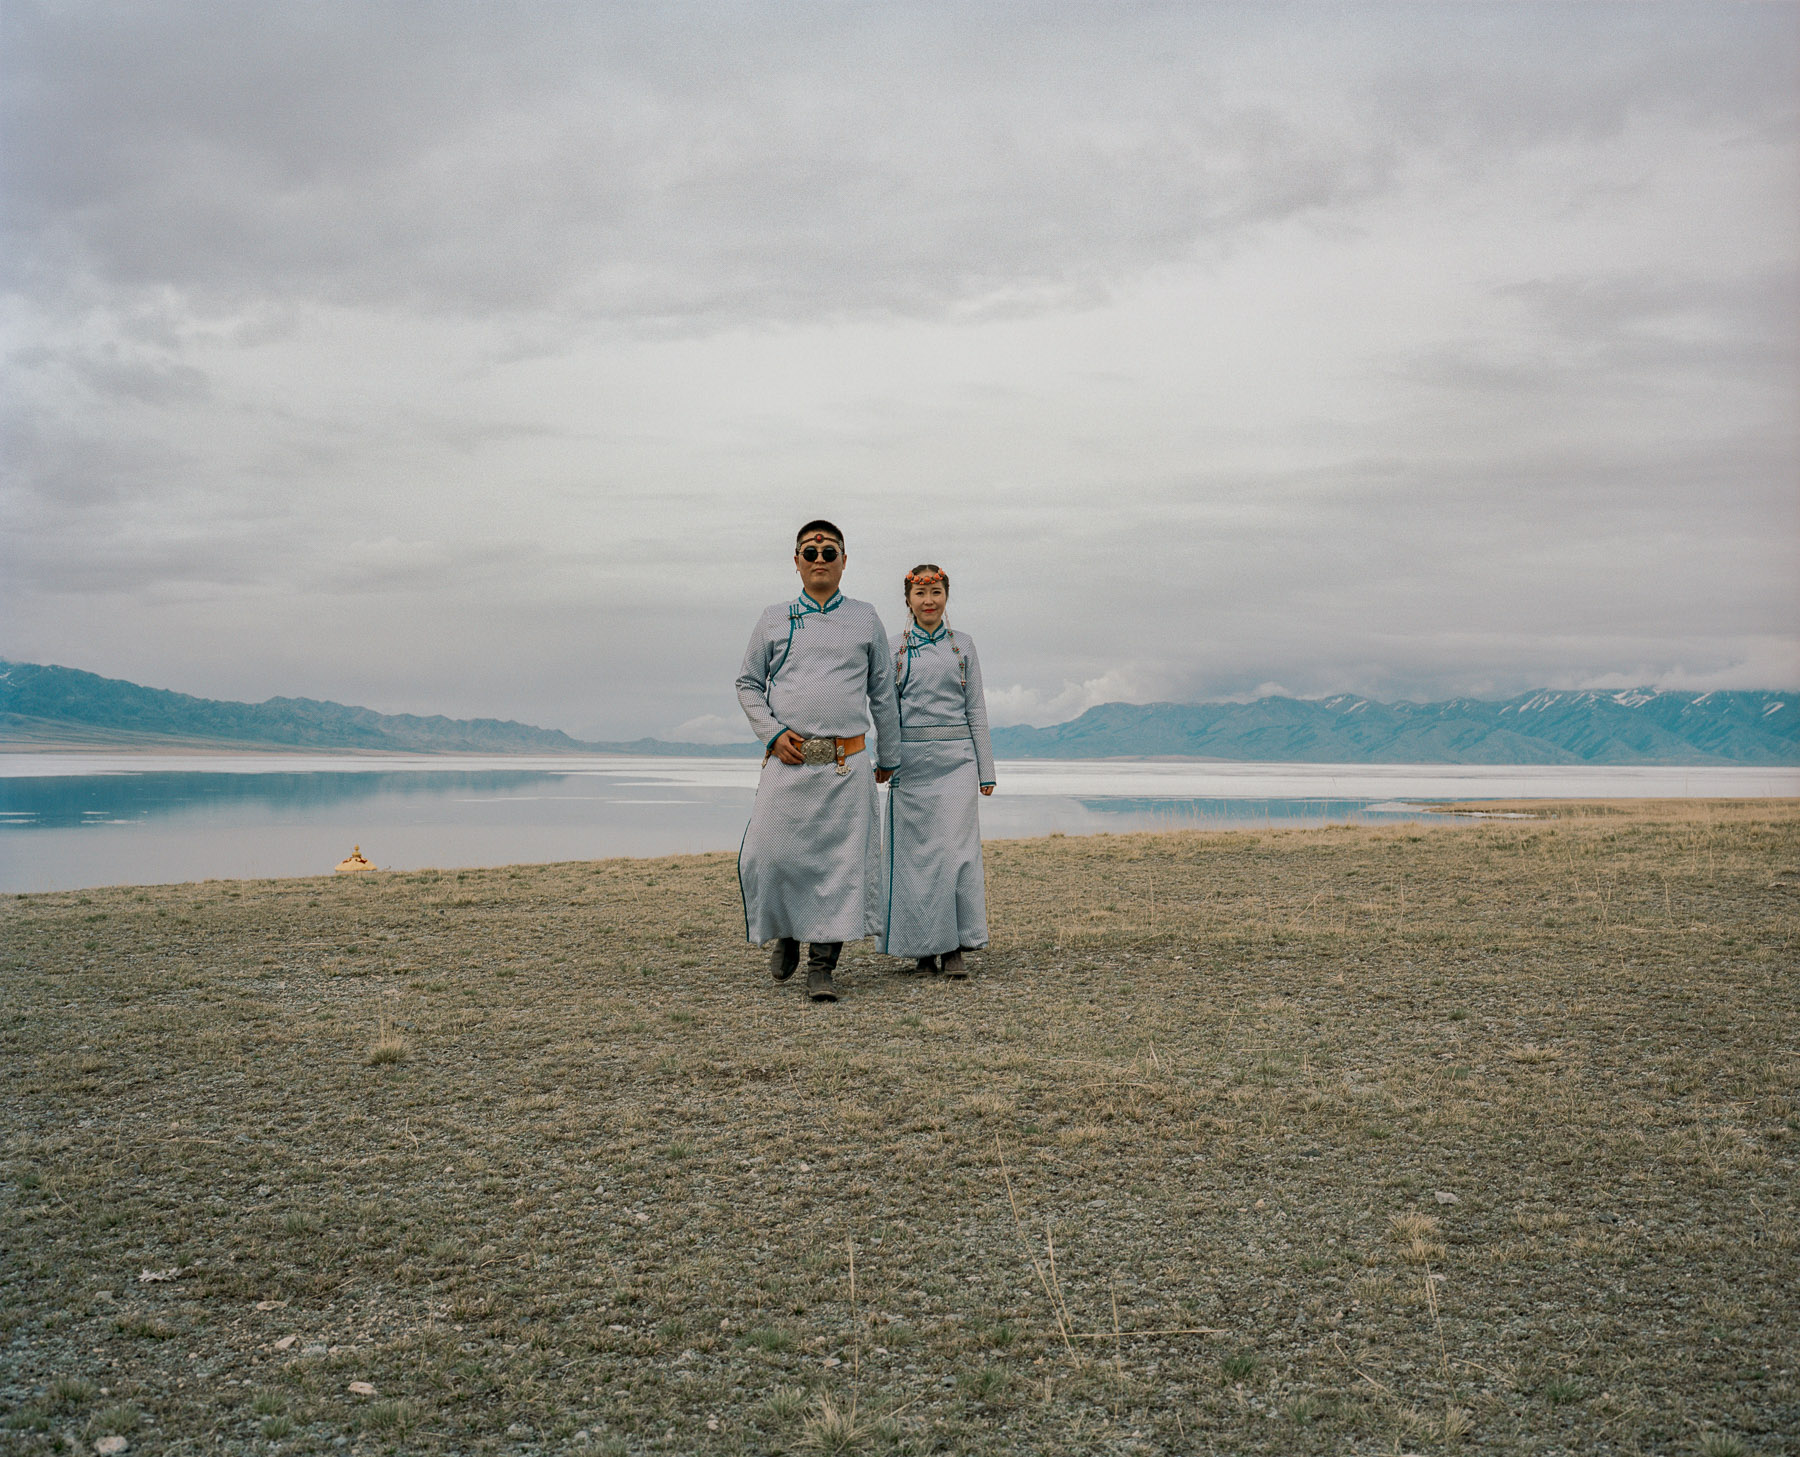  May 2017. Xinjiang province, China. A Chinese official of the Mongol minority taking wedding pictures near Sayram lake in the North-western part of the Chinese province of Xinjiang. View of Sayram lake in the North-western part of Xinjiang province 